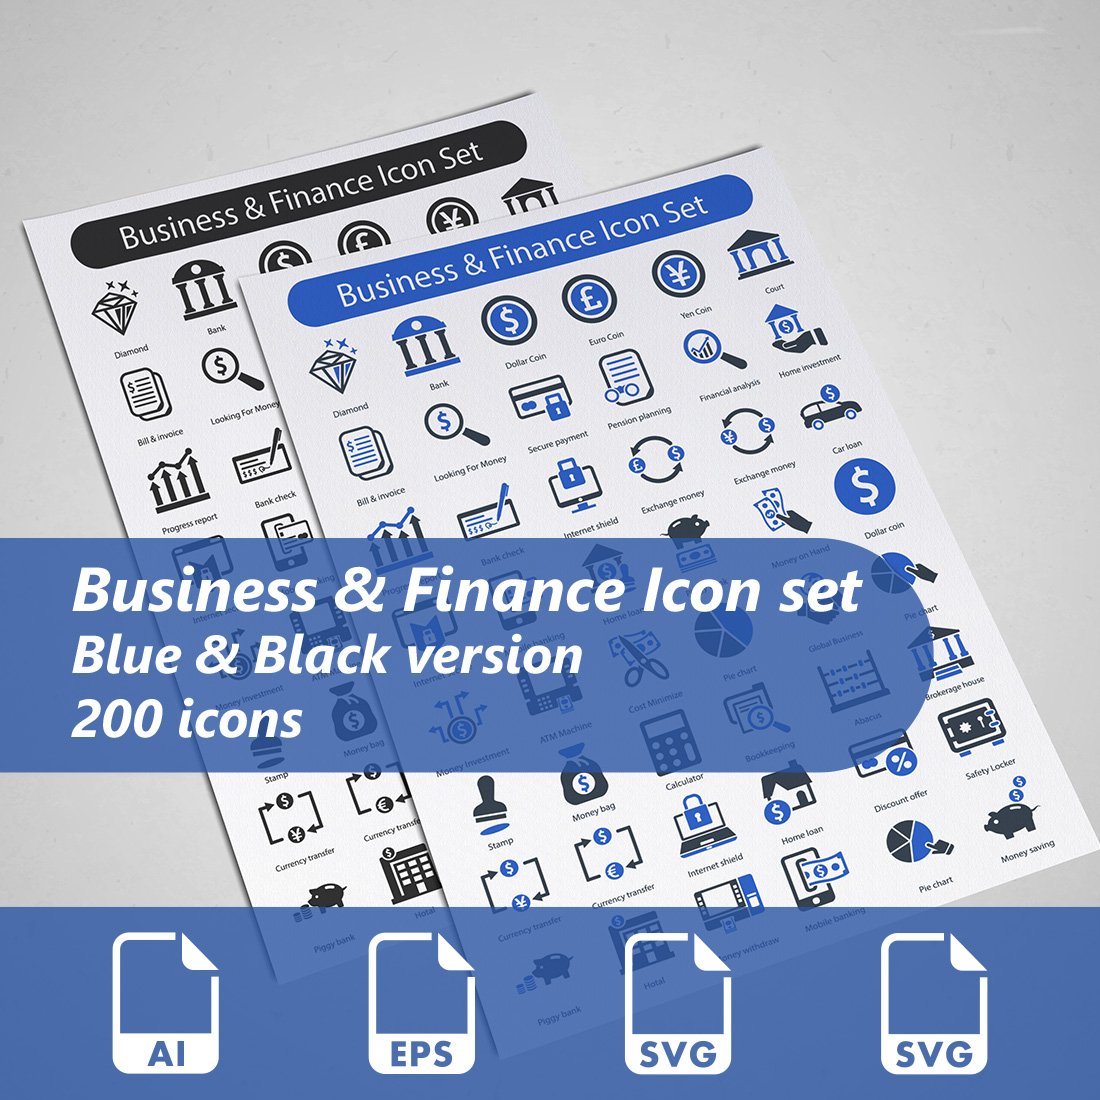 Business And Finance Icon Set cover image.